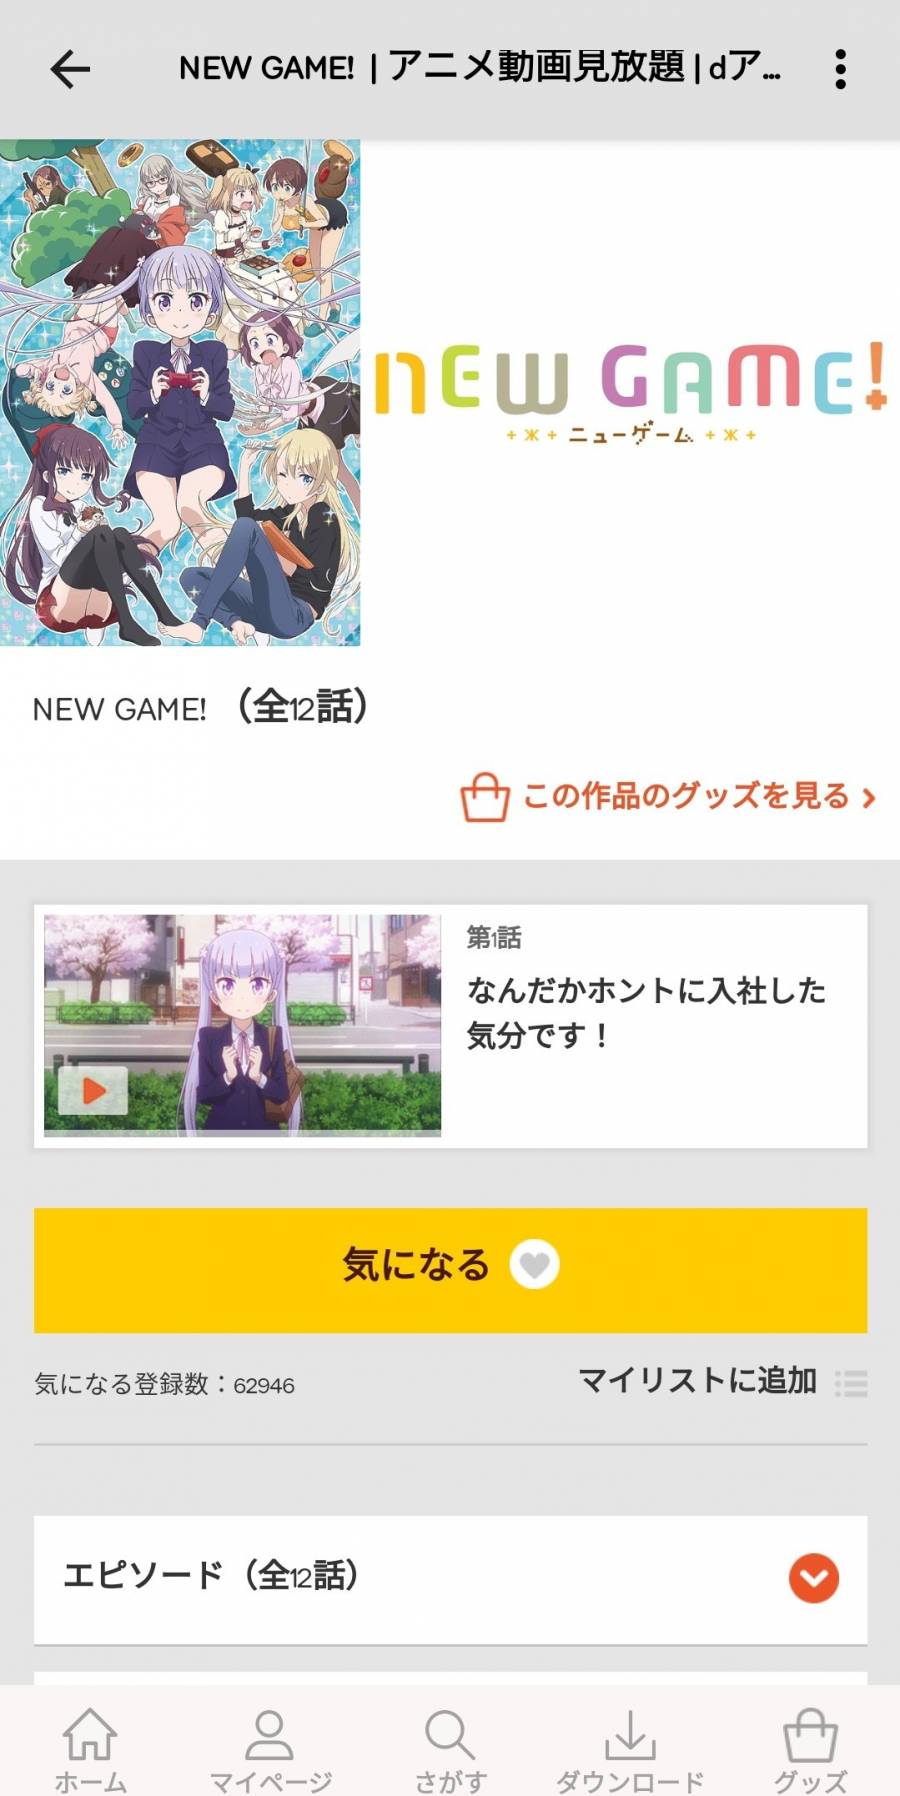 『NEW GAME!』のページ